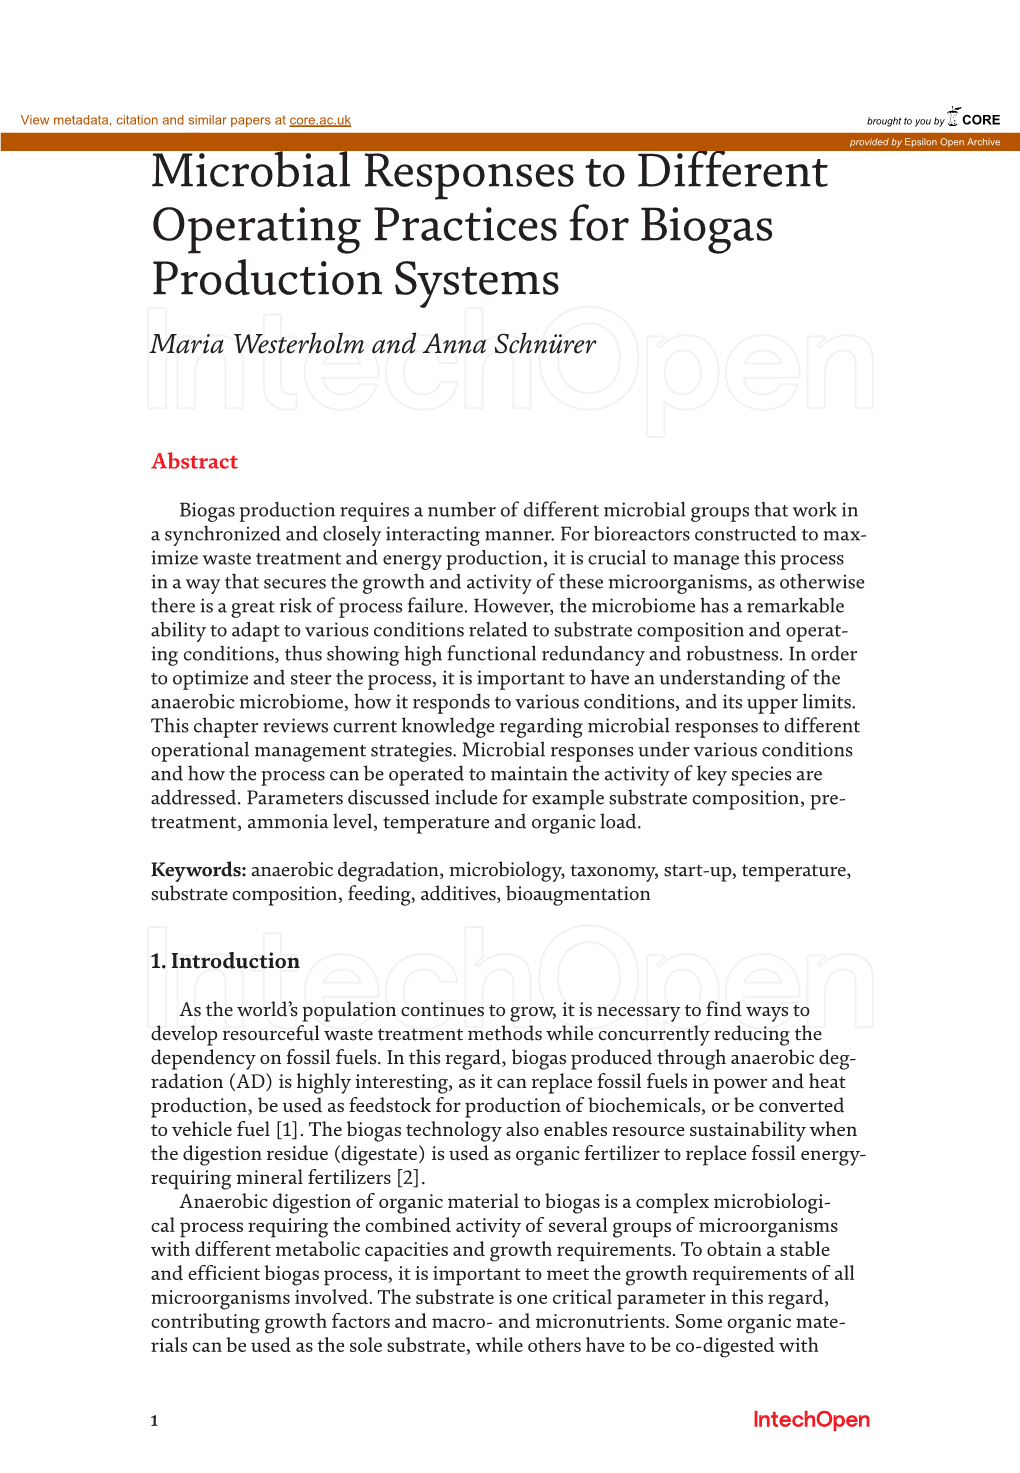 Microbial Responses to Different Operating Practices for Biogas Production Systems Maria Westerholm and Anna Schnürer